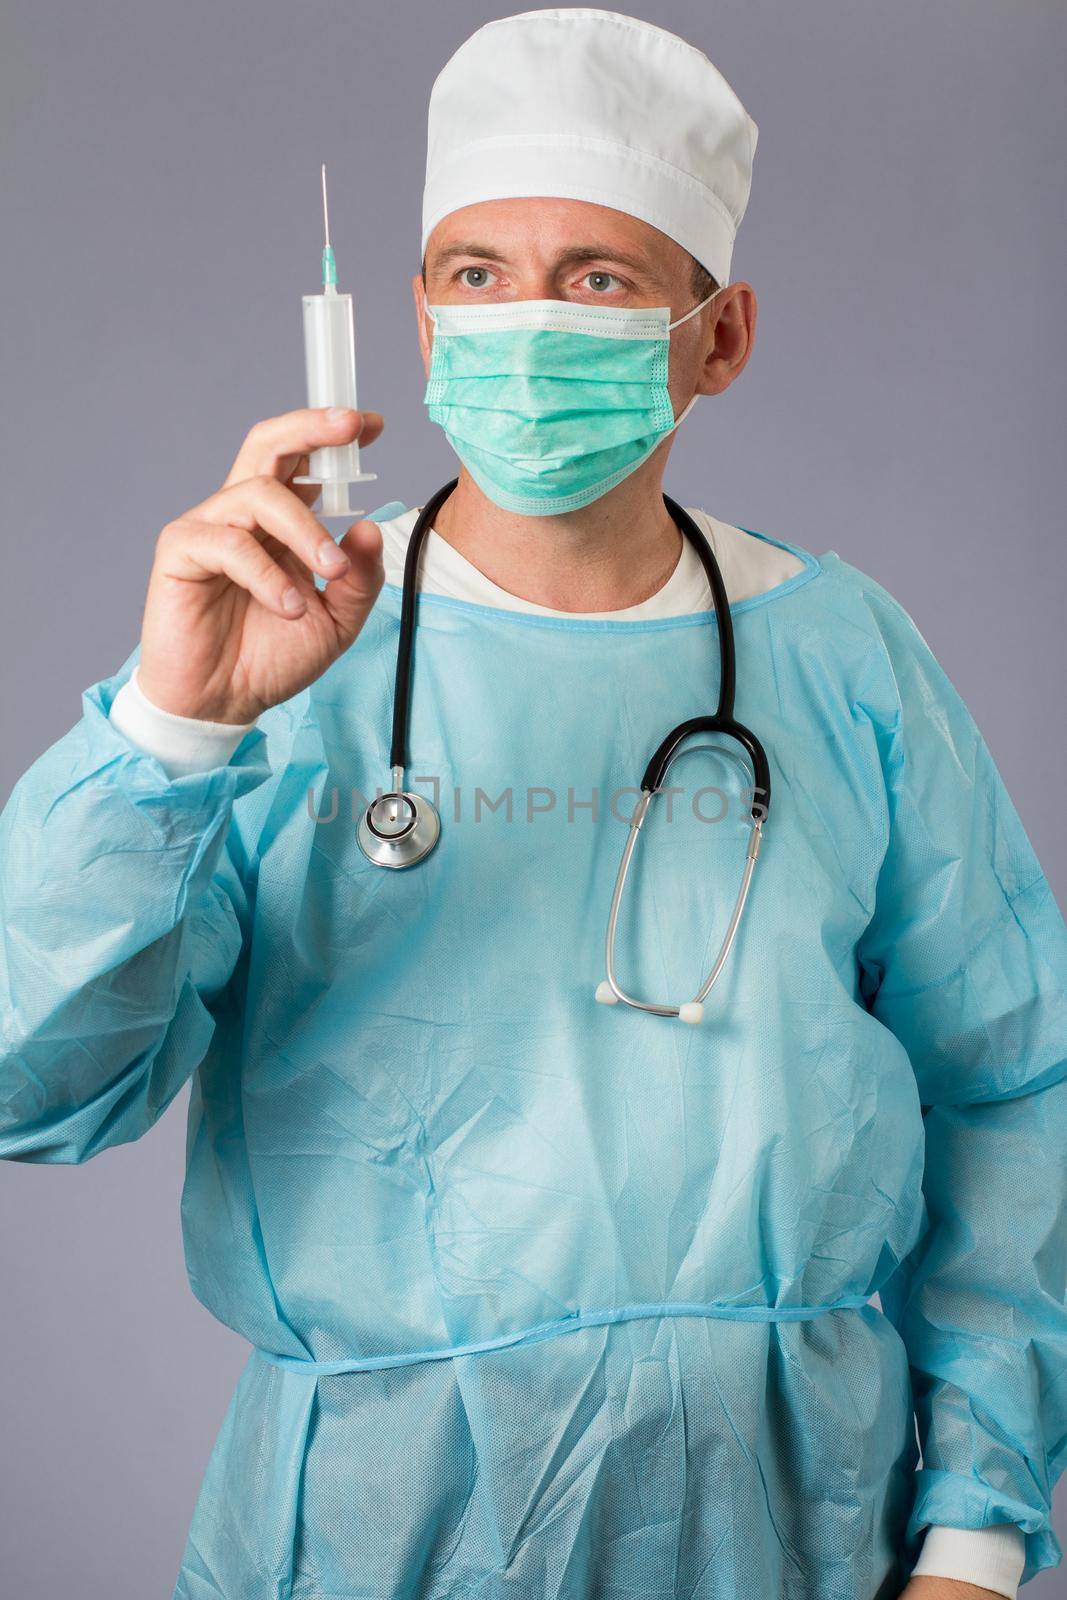 Medical doctor dressed in a medical gown with stethoscope and face mask holding a syringe. Gray background